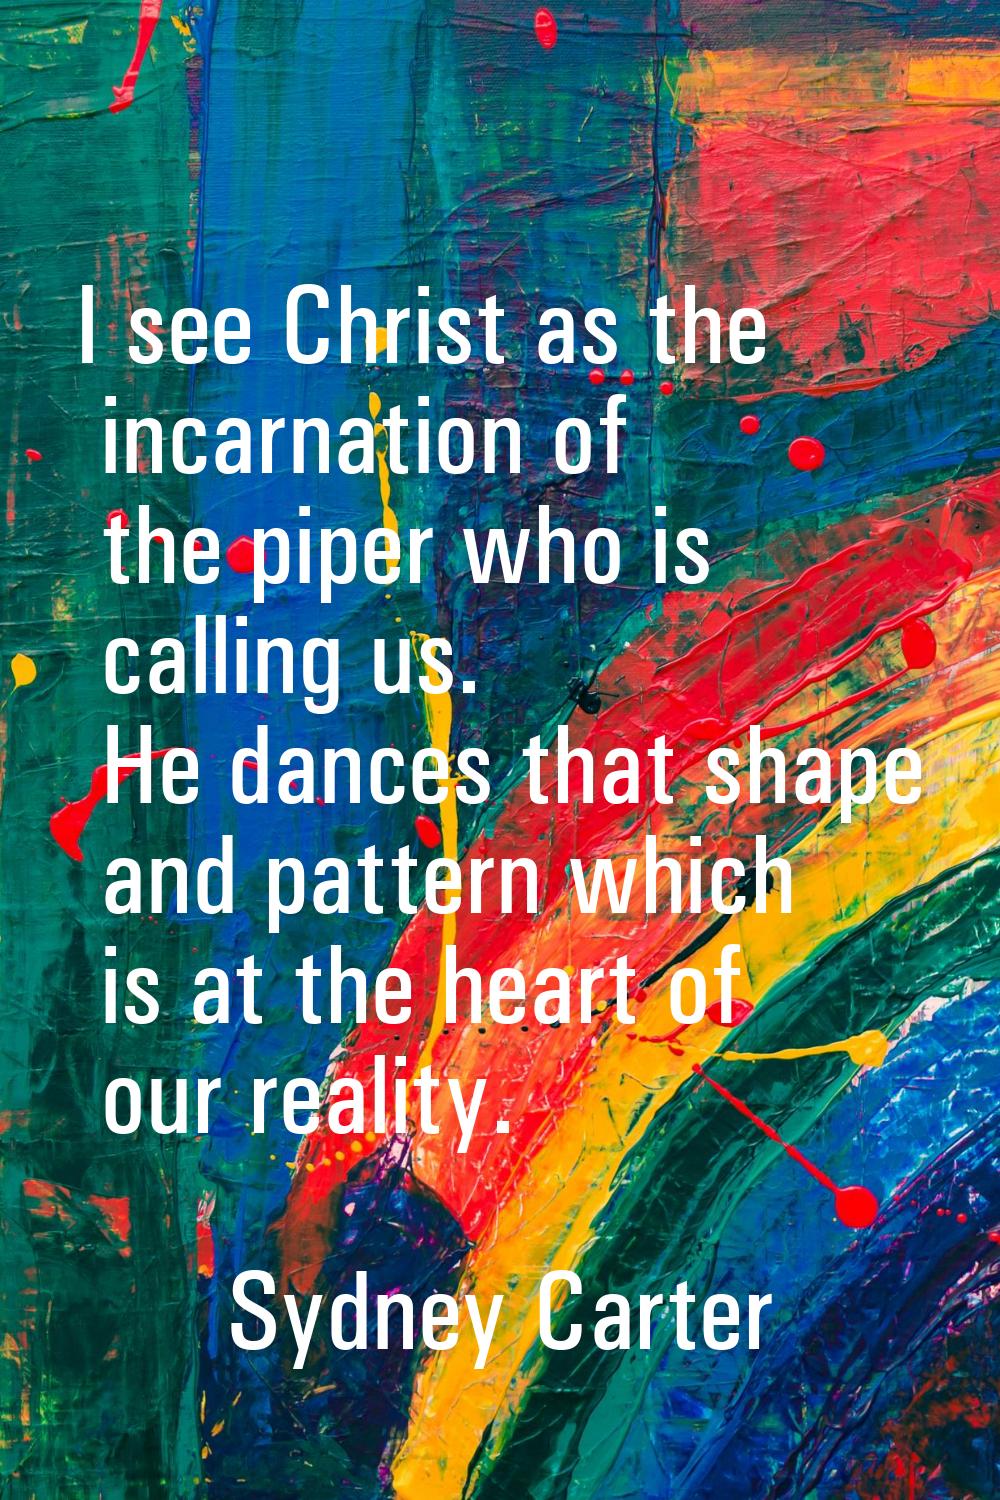 I see Christ as the incarnation of the piper who is calling us. He dances that shape and pattern wh